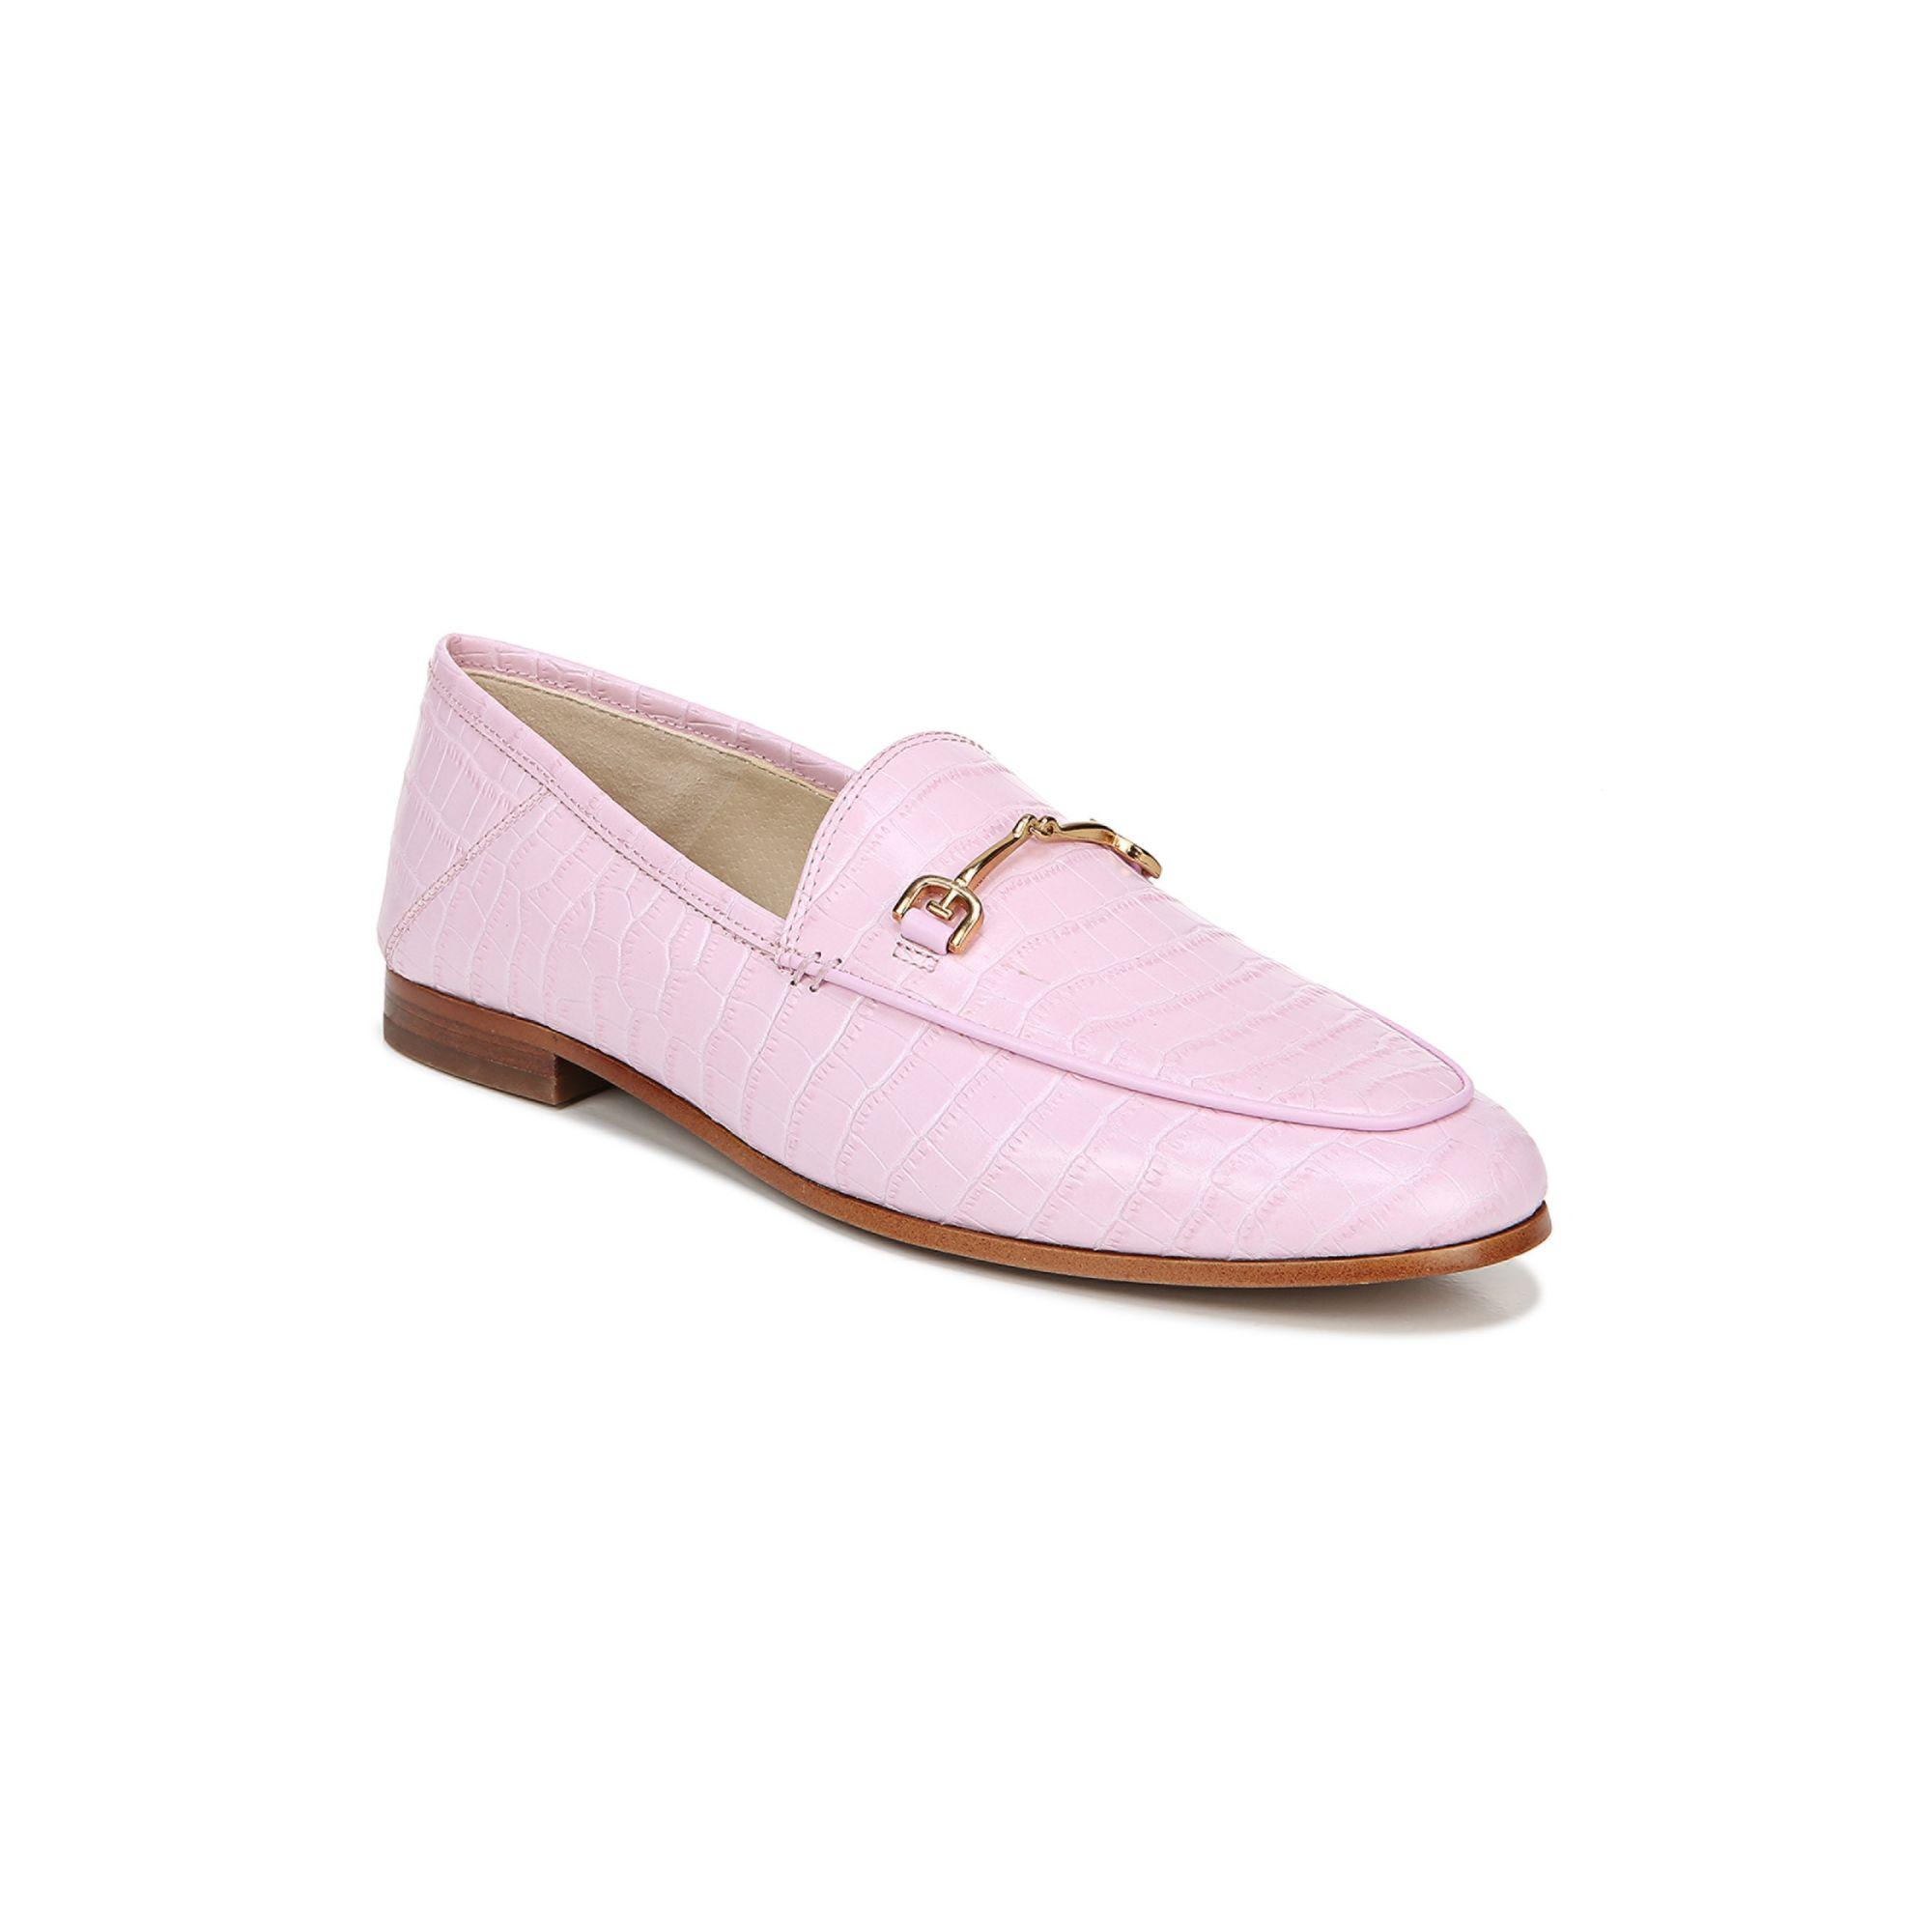 Sam Edelman Leather Loraine Croc-embossed Loafers in Pink - Lyst